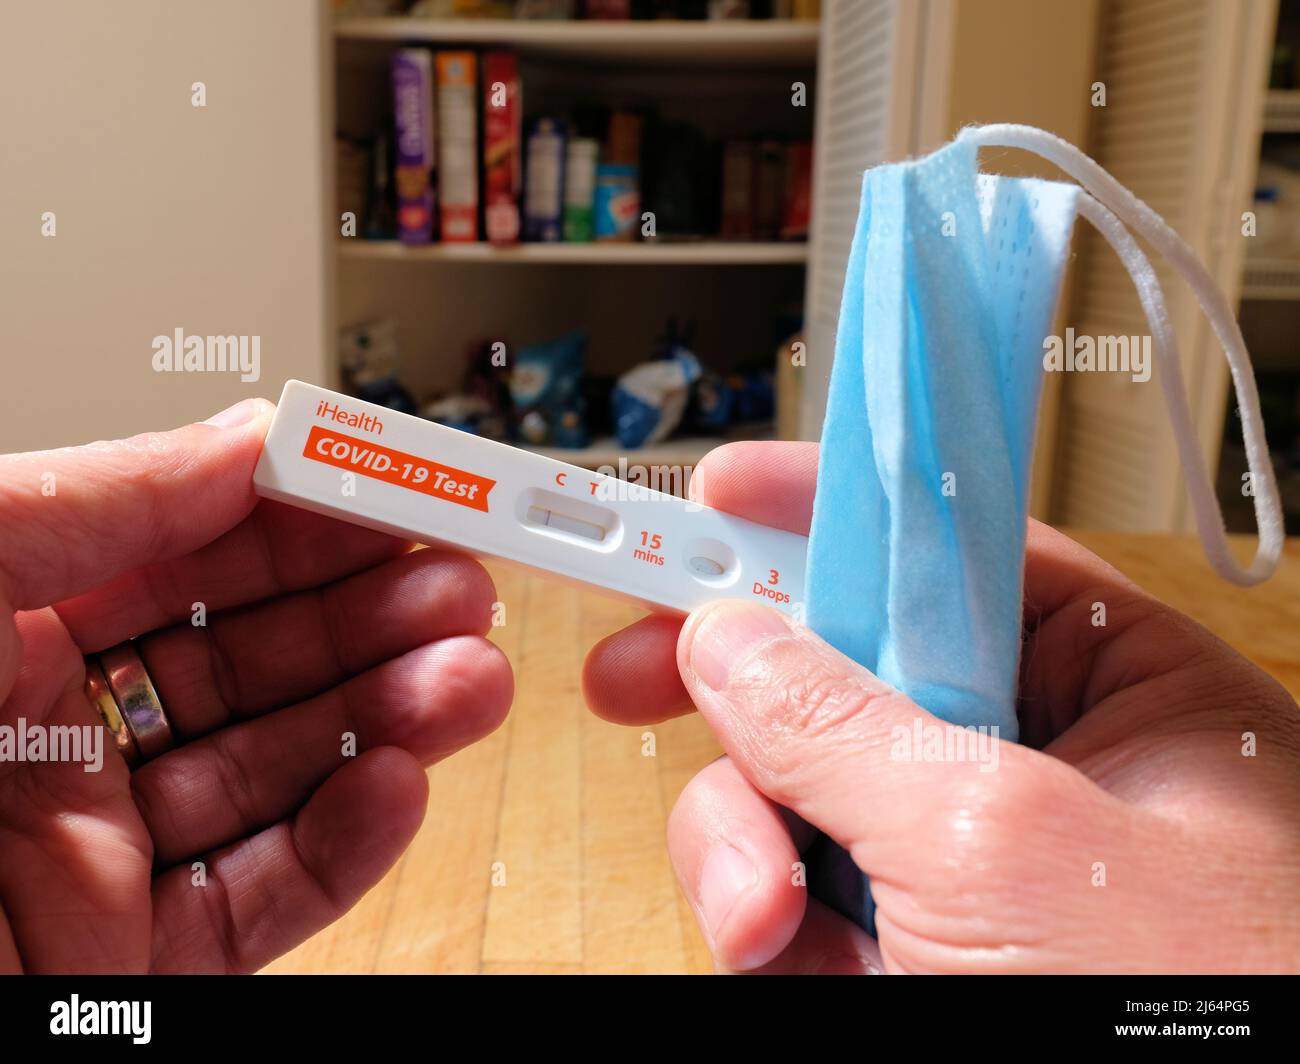 Person's hand holding an iHealth COVID-19 Antigen Rapid Test in-home self test card displaying a negative Coronavirus result; with surgical facemask. Stock Photo